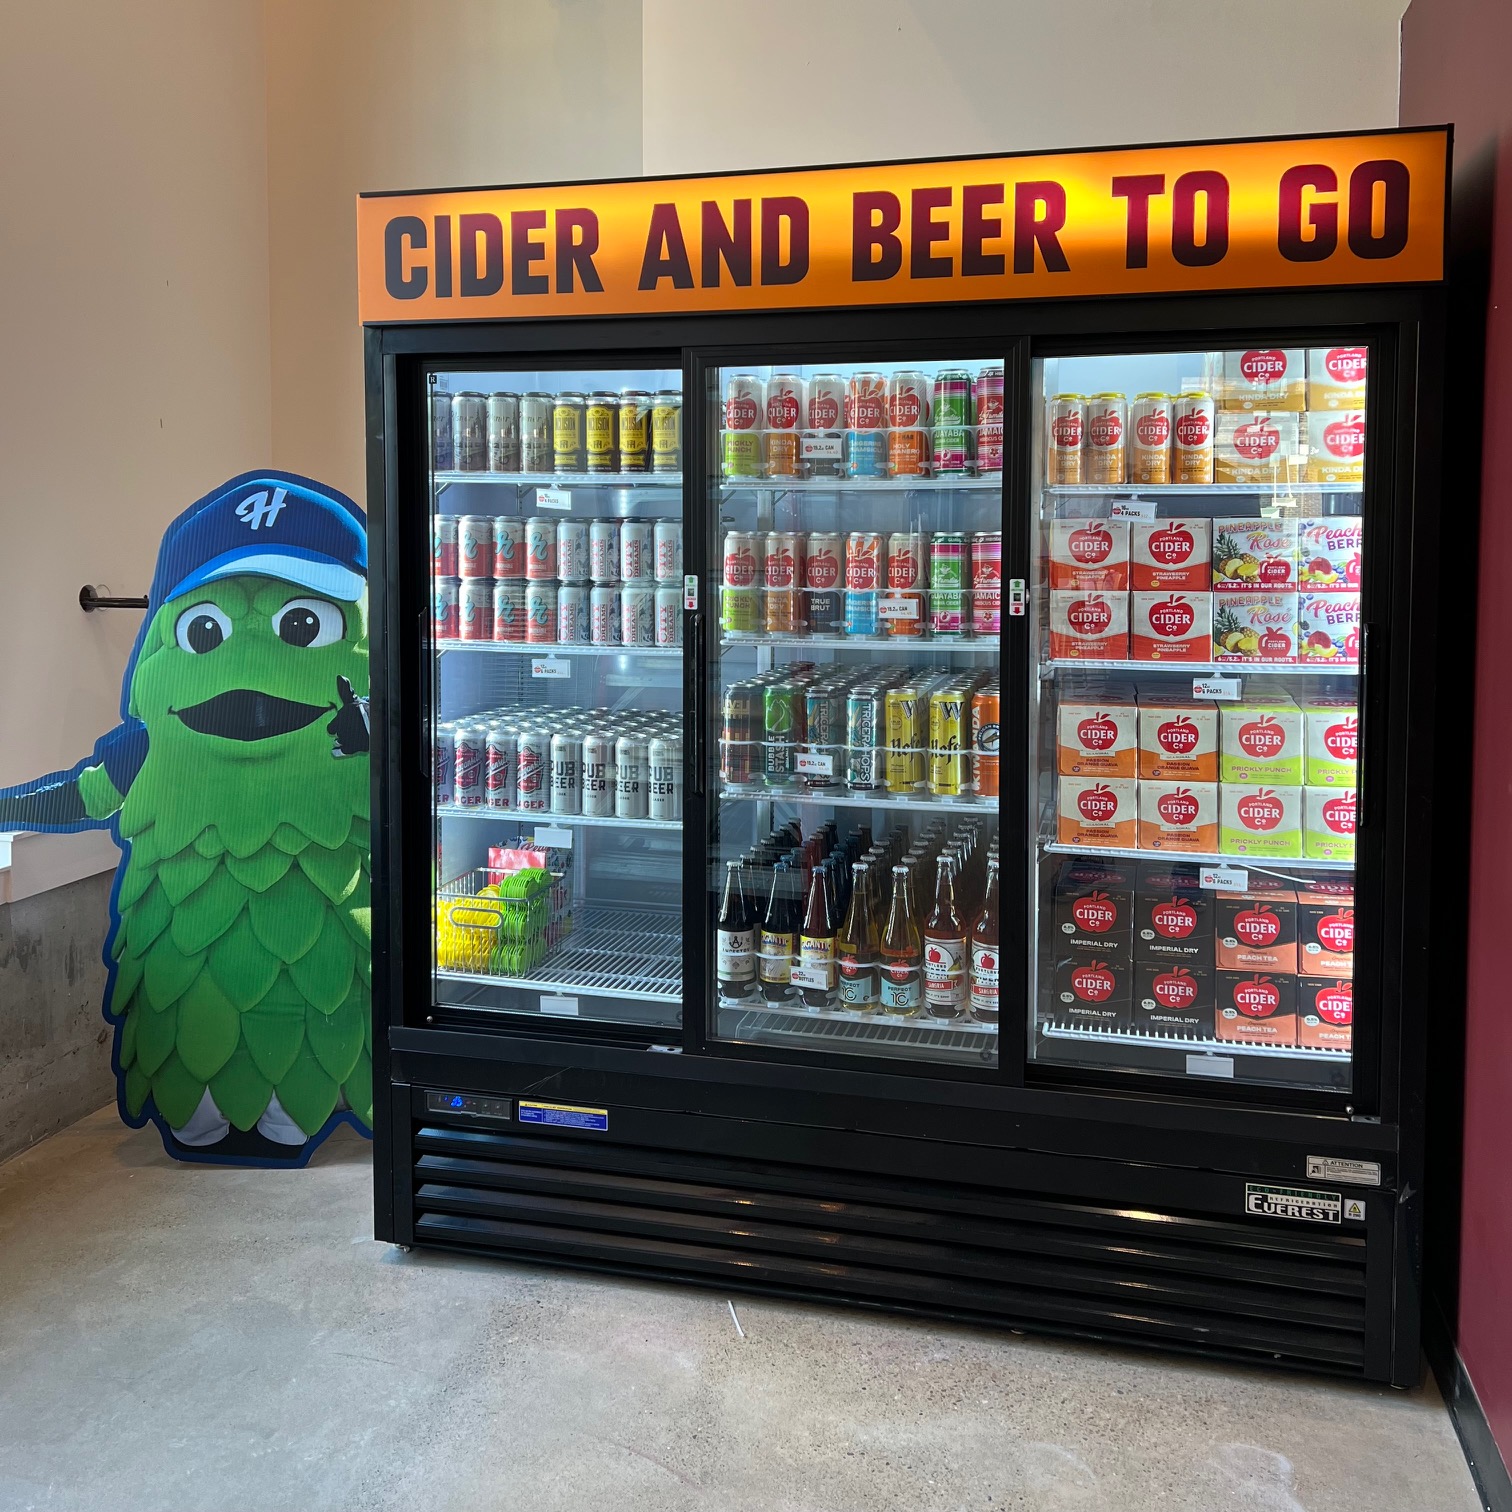 Barley the Hop will greet you when you grab some cider and beer to go at the new Portland Cider Westside Pub in Beaverton, Oregon.